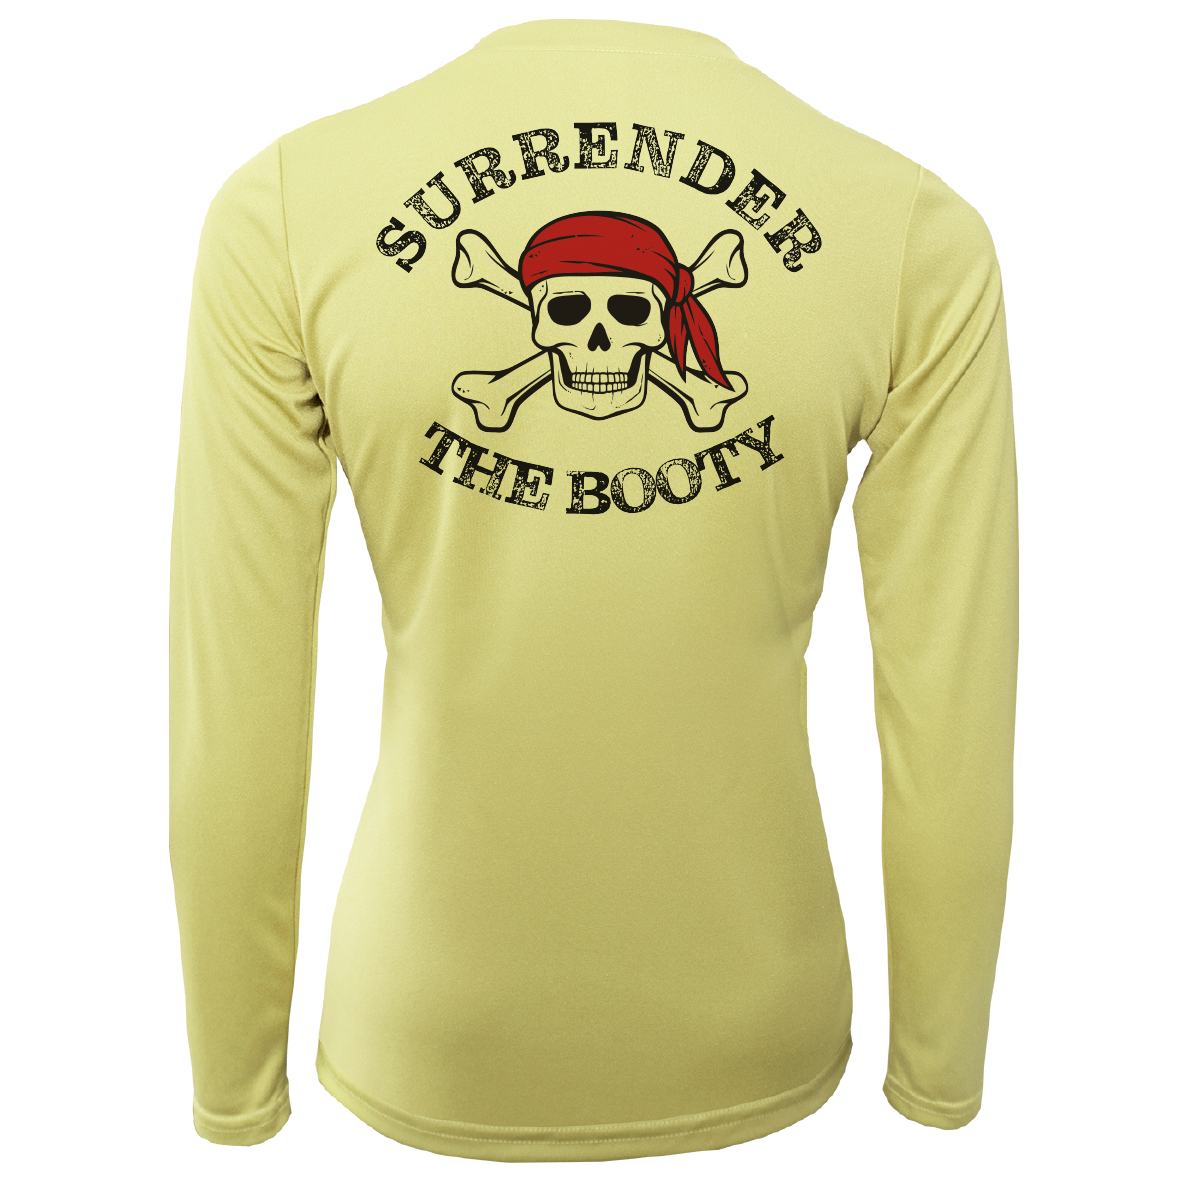 Michigan Freshwater Born "Surrender The Booty" Women's Long Sleeve UPF 50+ Dry-Fit Shirt